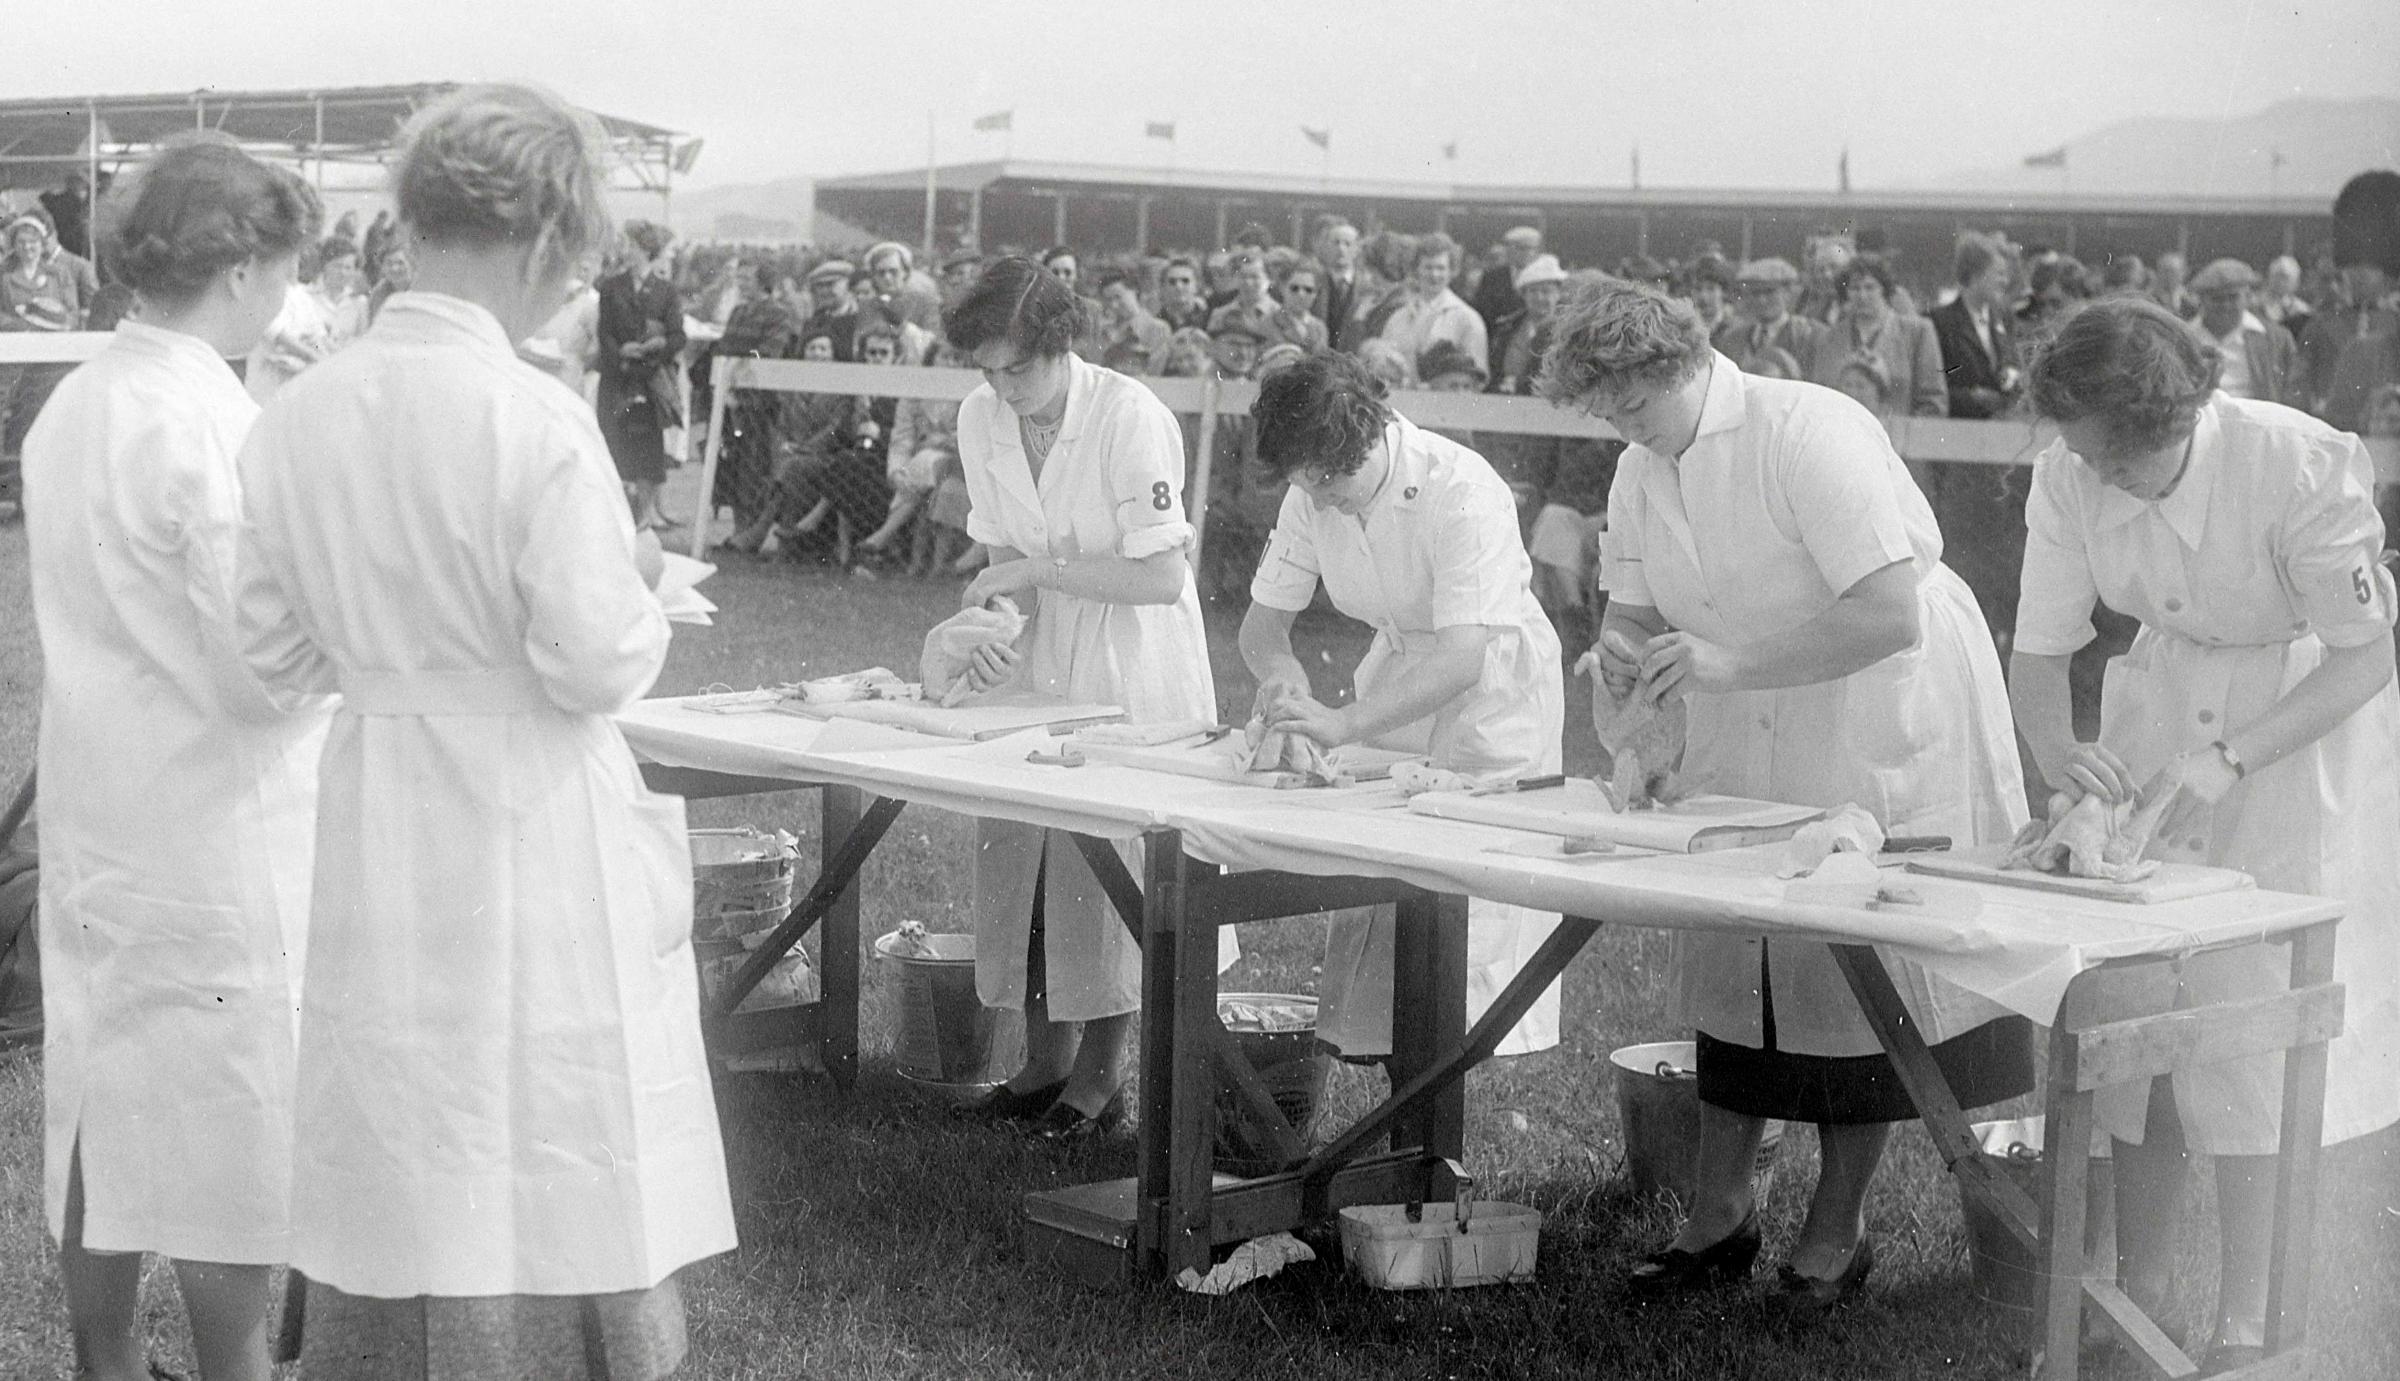 Chicken trussing was a popular YFC competition at the Highland – this was at the 1955 show in Edinburgh Picture ref: 1611-1